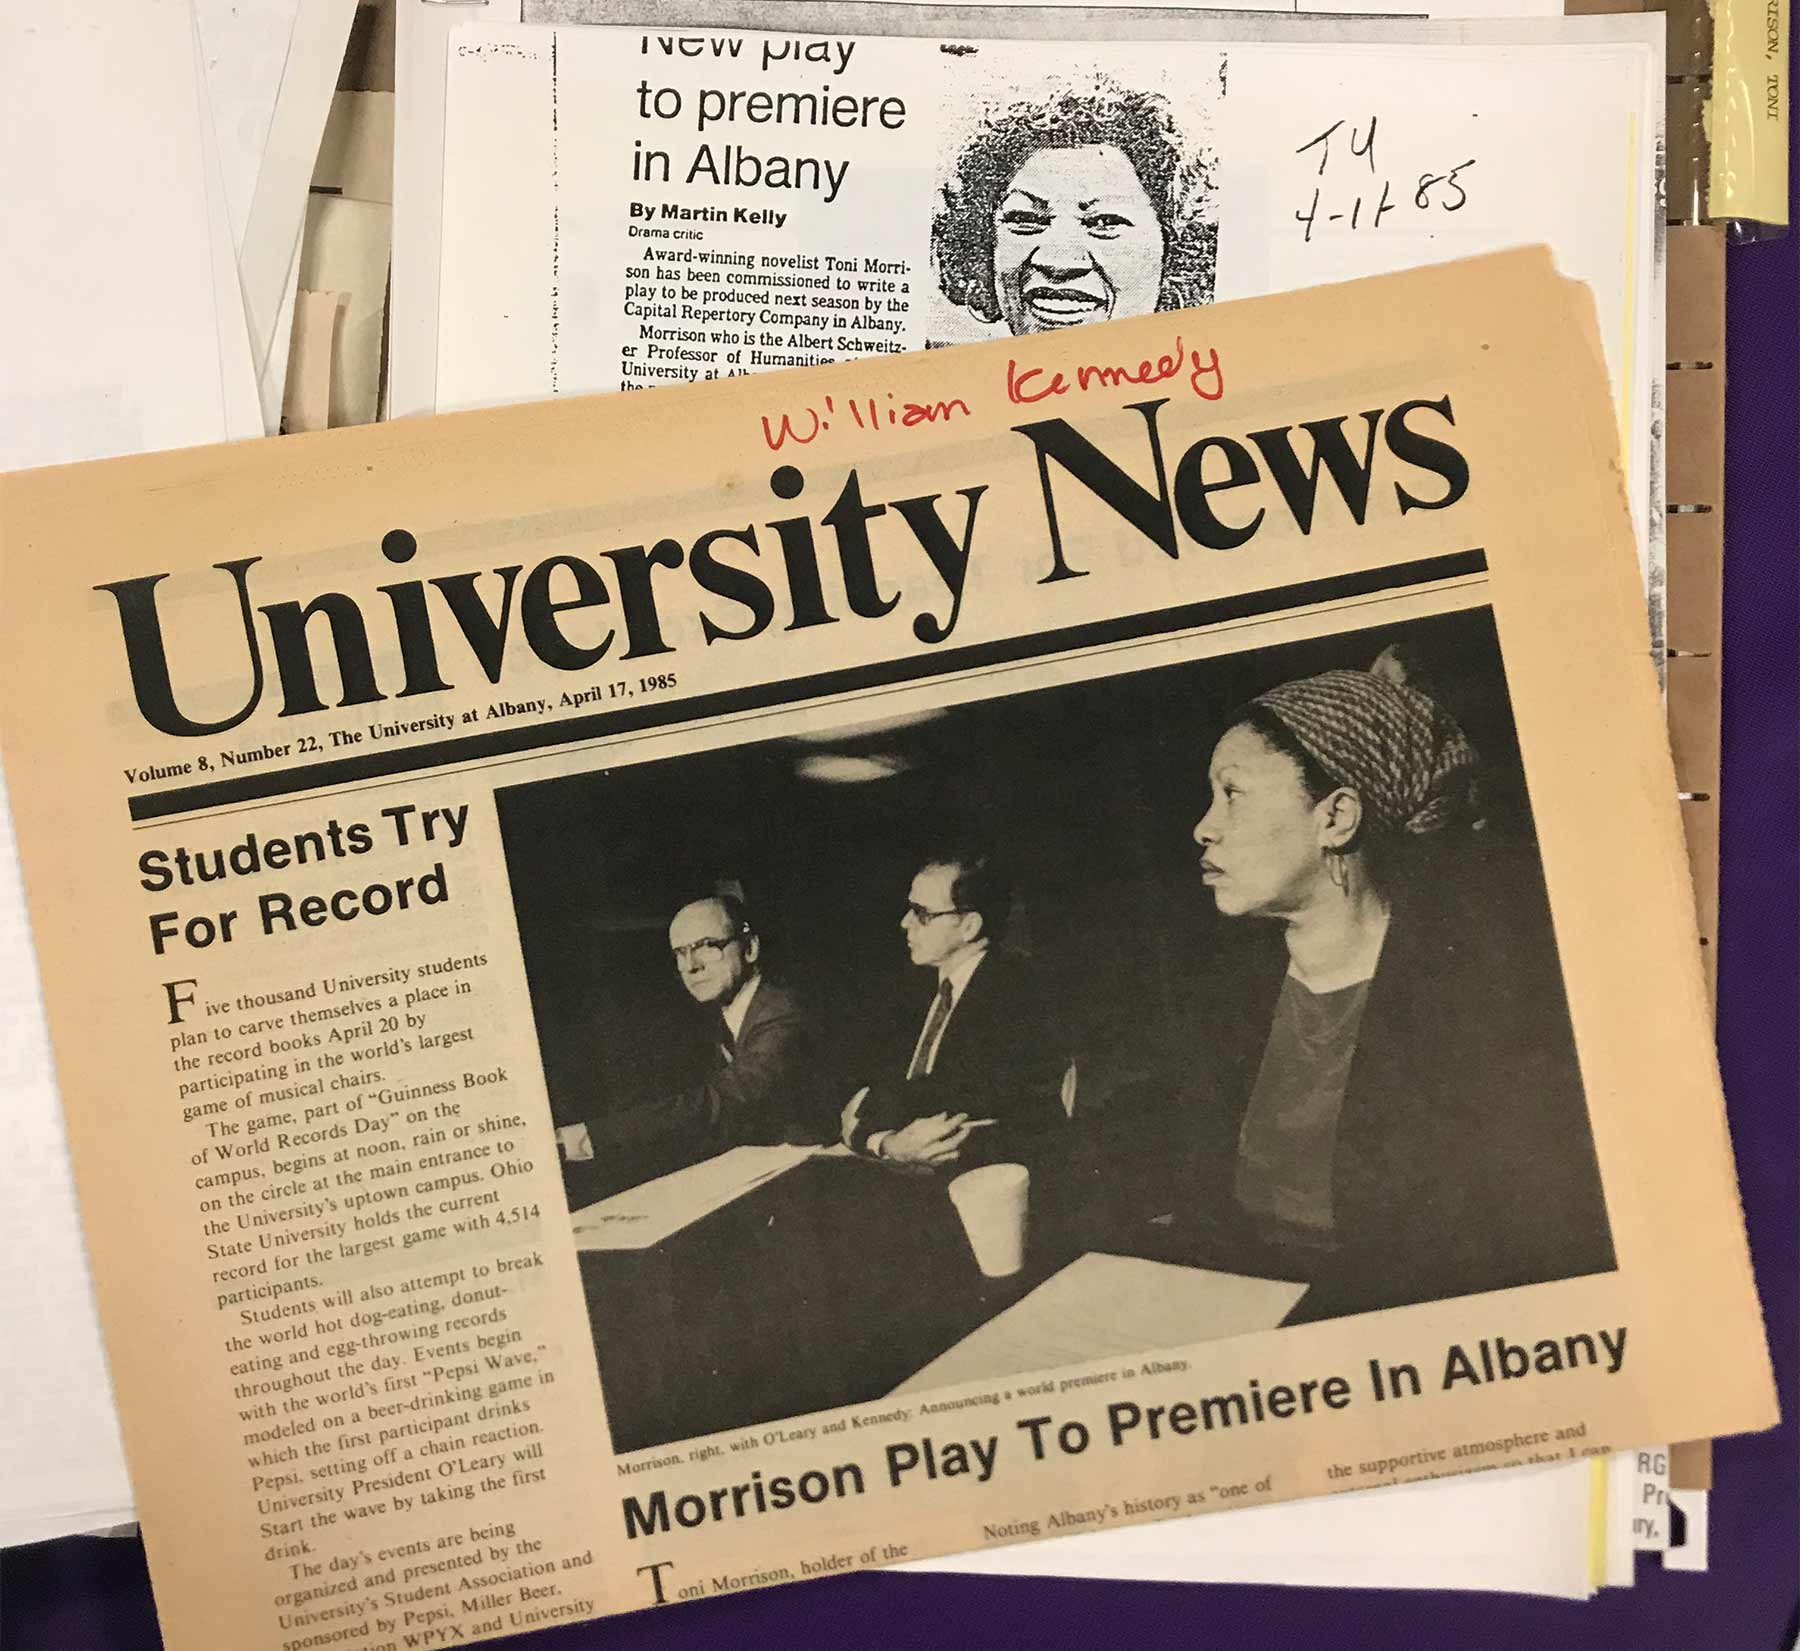 "Morrison Play to Premiere in Albany" announced in the University at Albany weekly newspaper, April 17, 1985. 